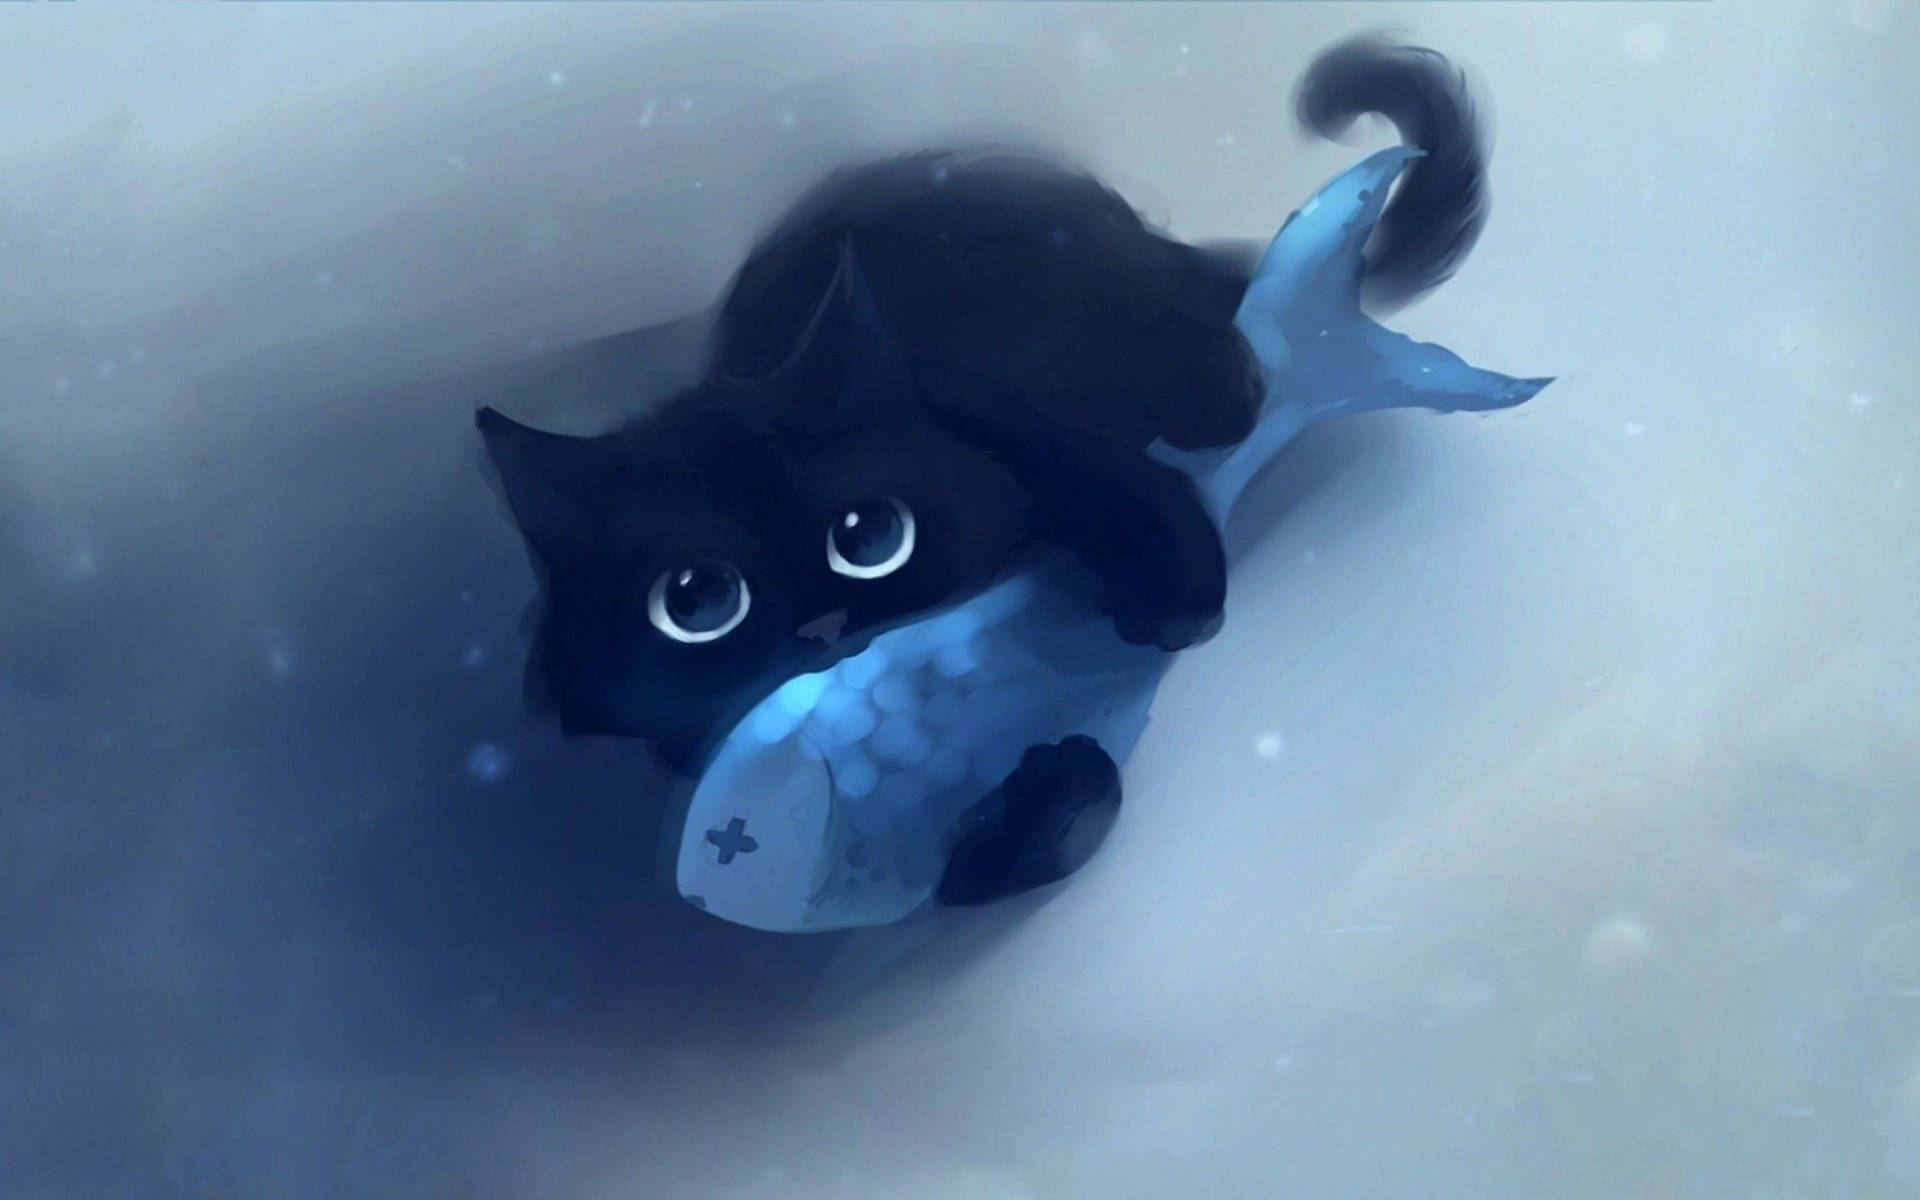 Cute Black 1920X1200 Wallpaper and Background Image